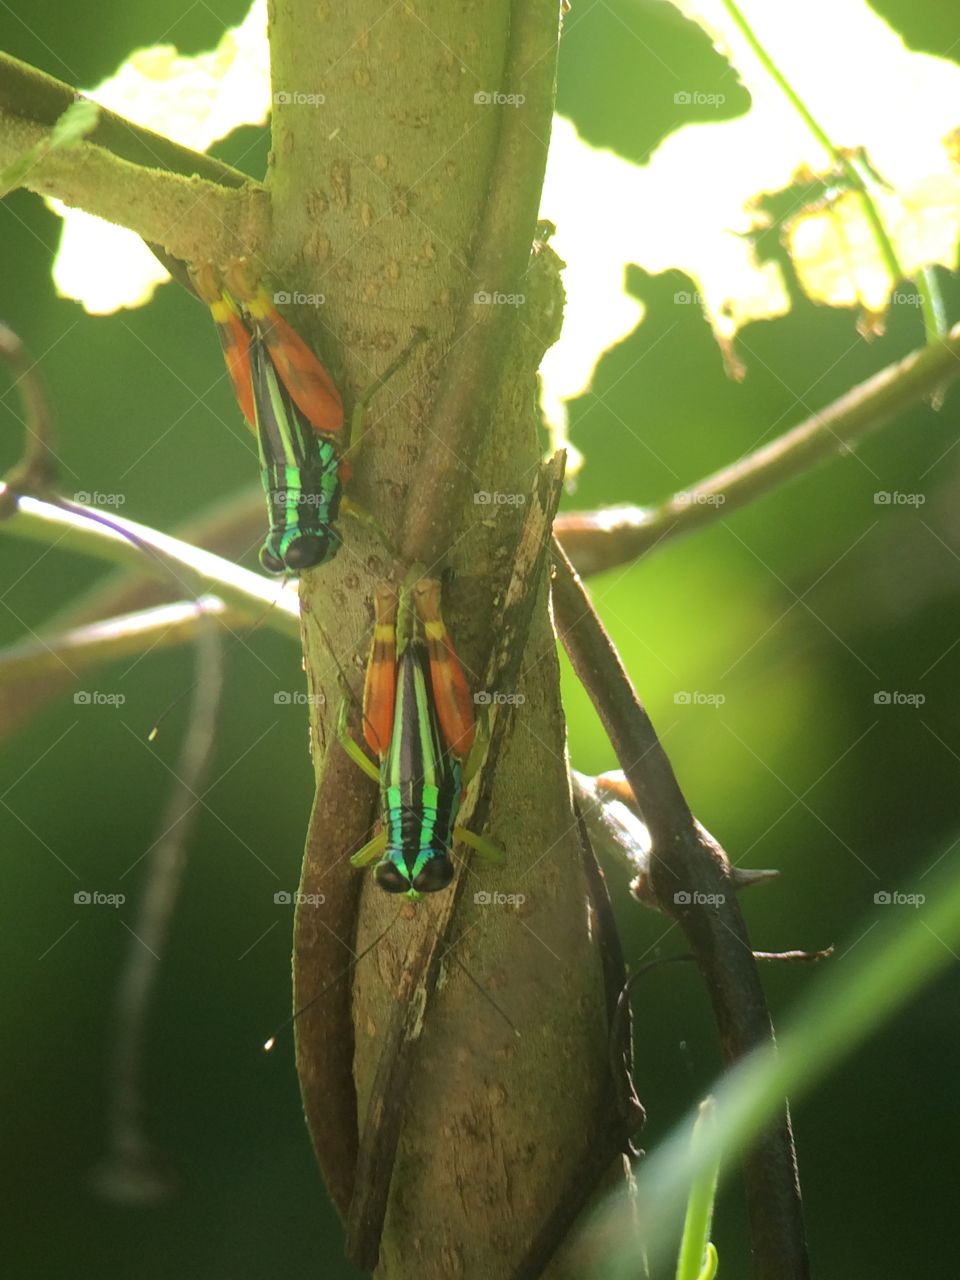 Poisonous Grasshoppers. Venomous grasshoppers rest on a tree in Central America